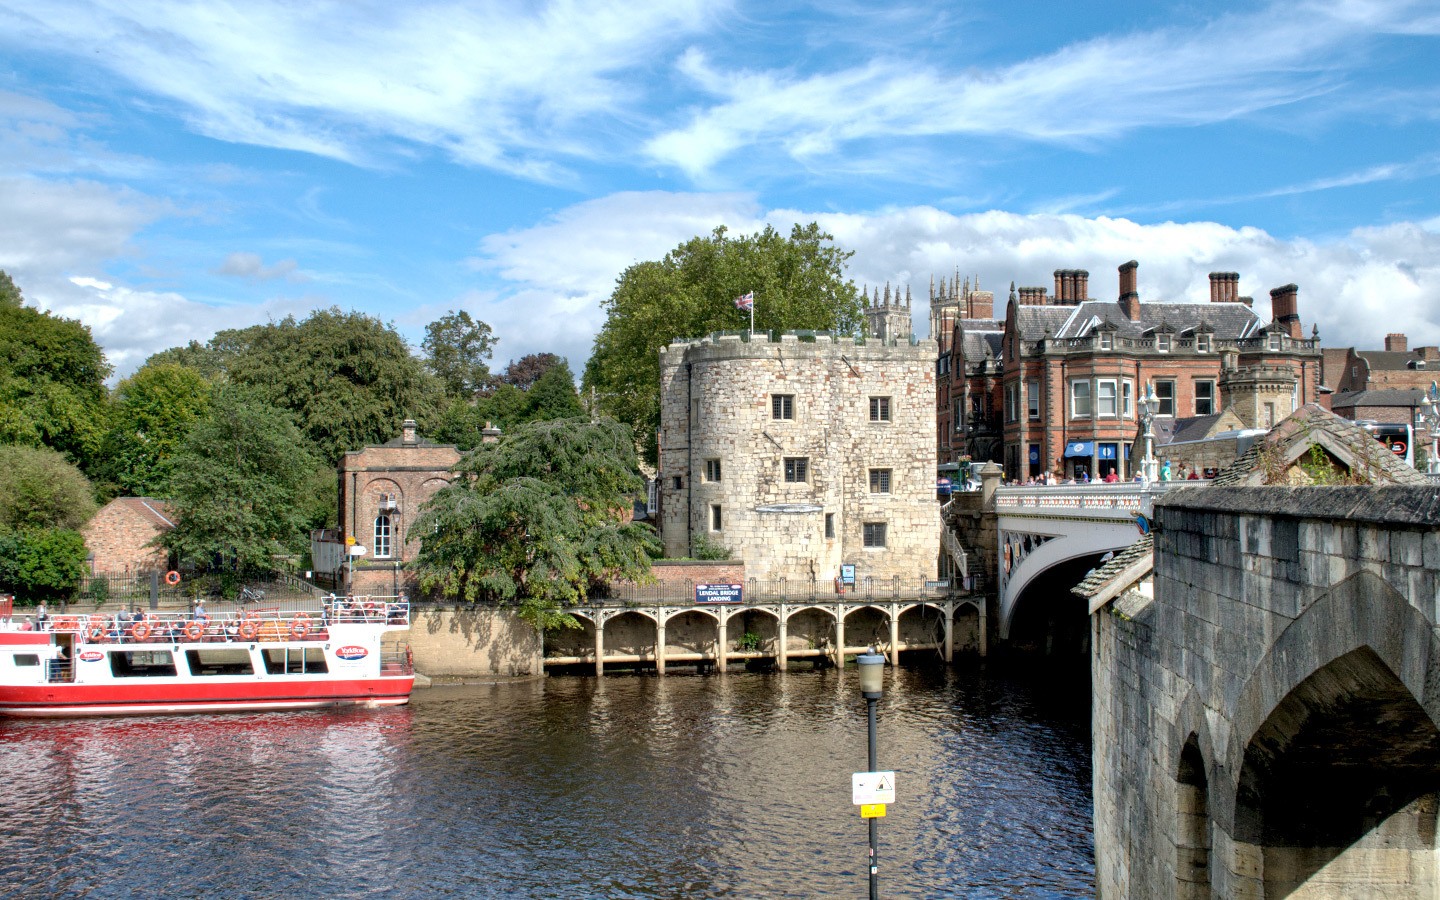 Boat trips on the River Ouse in York